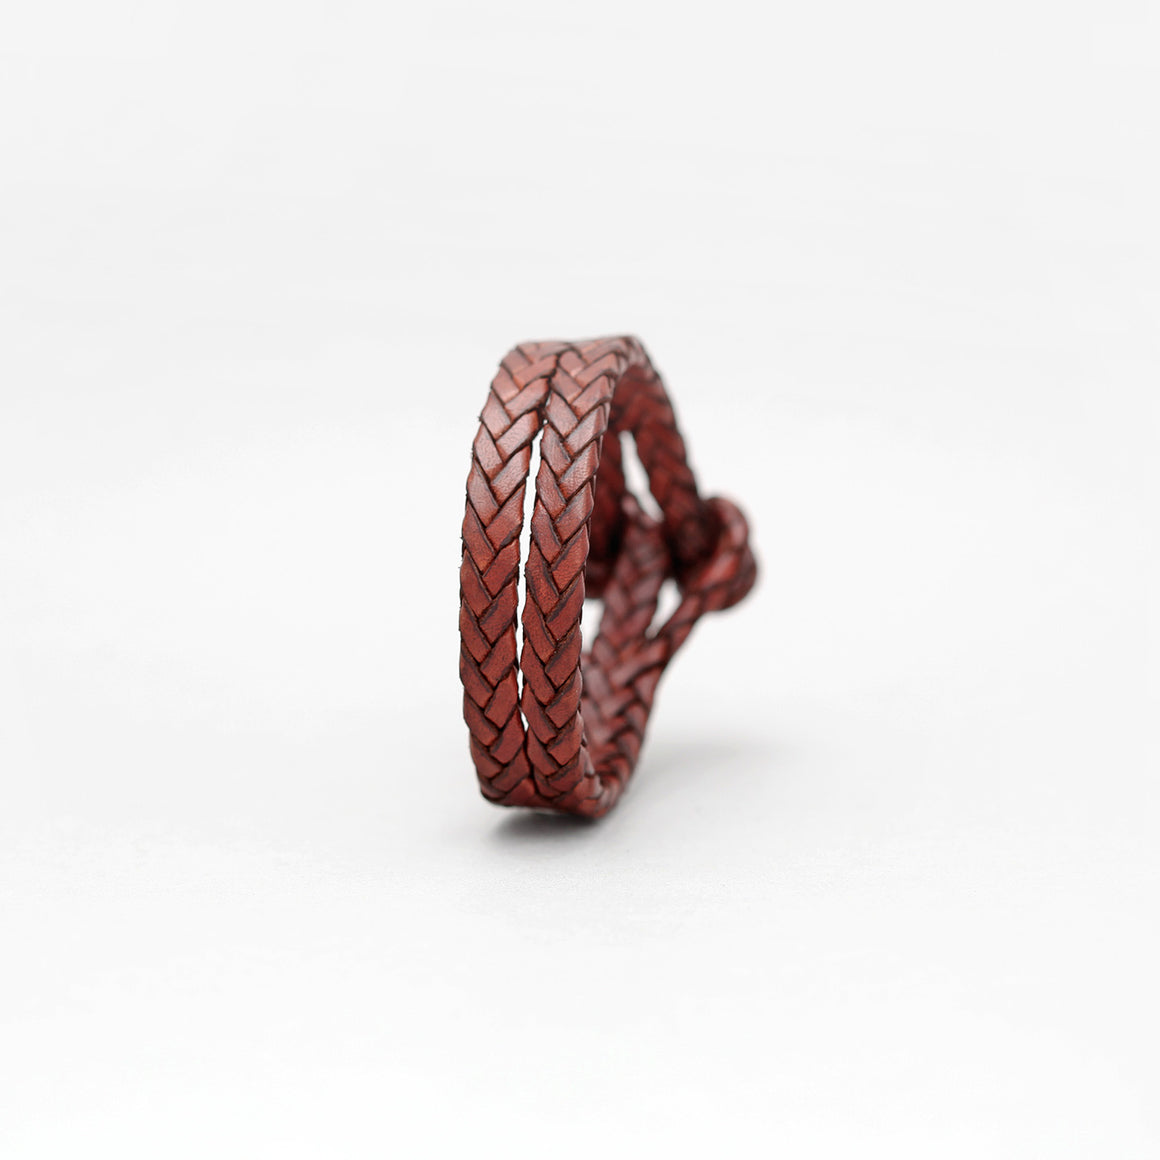 DOUBLE CLOSURE SLIT BRAIDED  LEATHER BRACELET IN BROWN